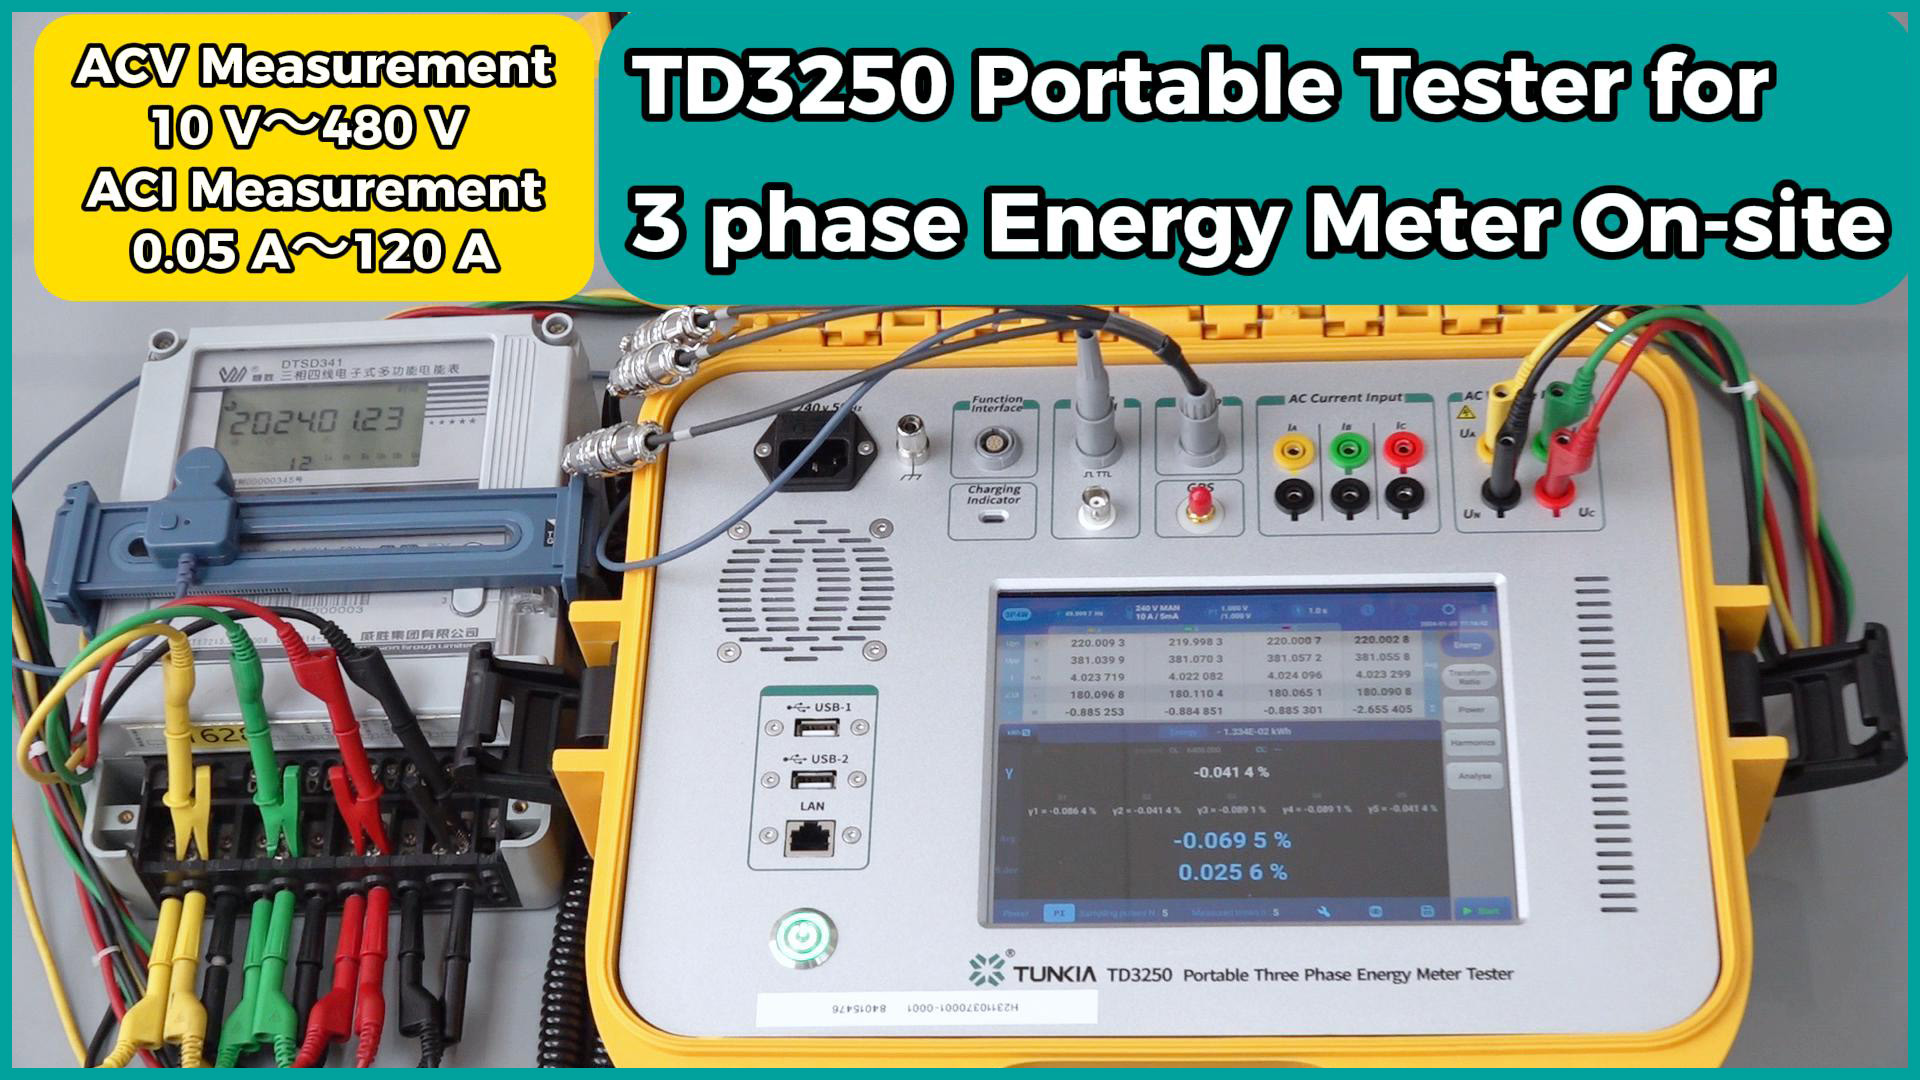 How to Test Three-phase Energy Meter On-site-TD3250 Portable Three-phase Energy Meter Tester 